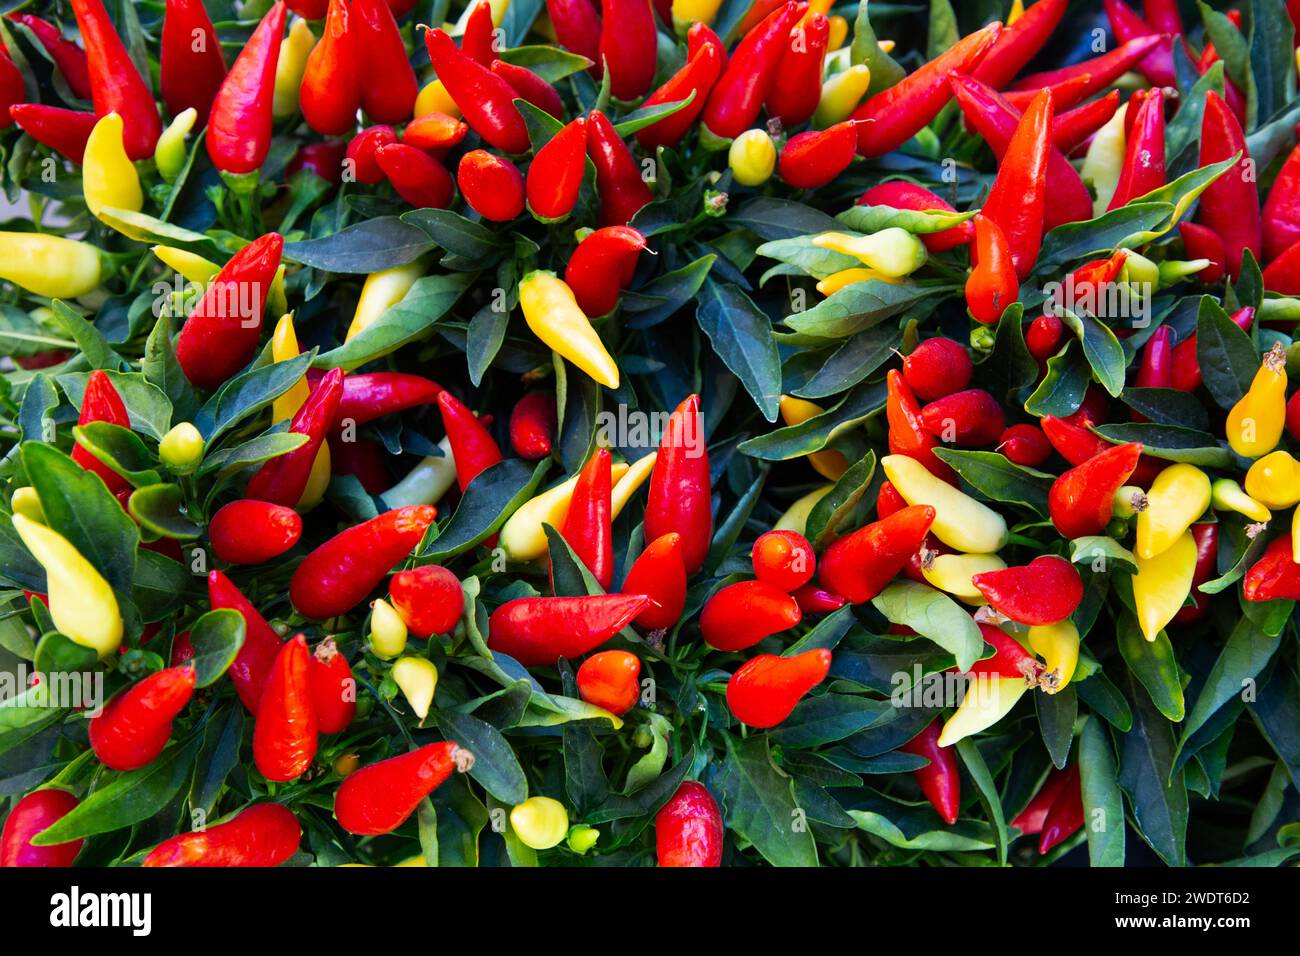 Red and Green Chilli Peppers, Viktualienmakt (Market), Old Town, Munich, Bavaria, Germany, Europe Stock Photo